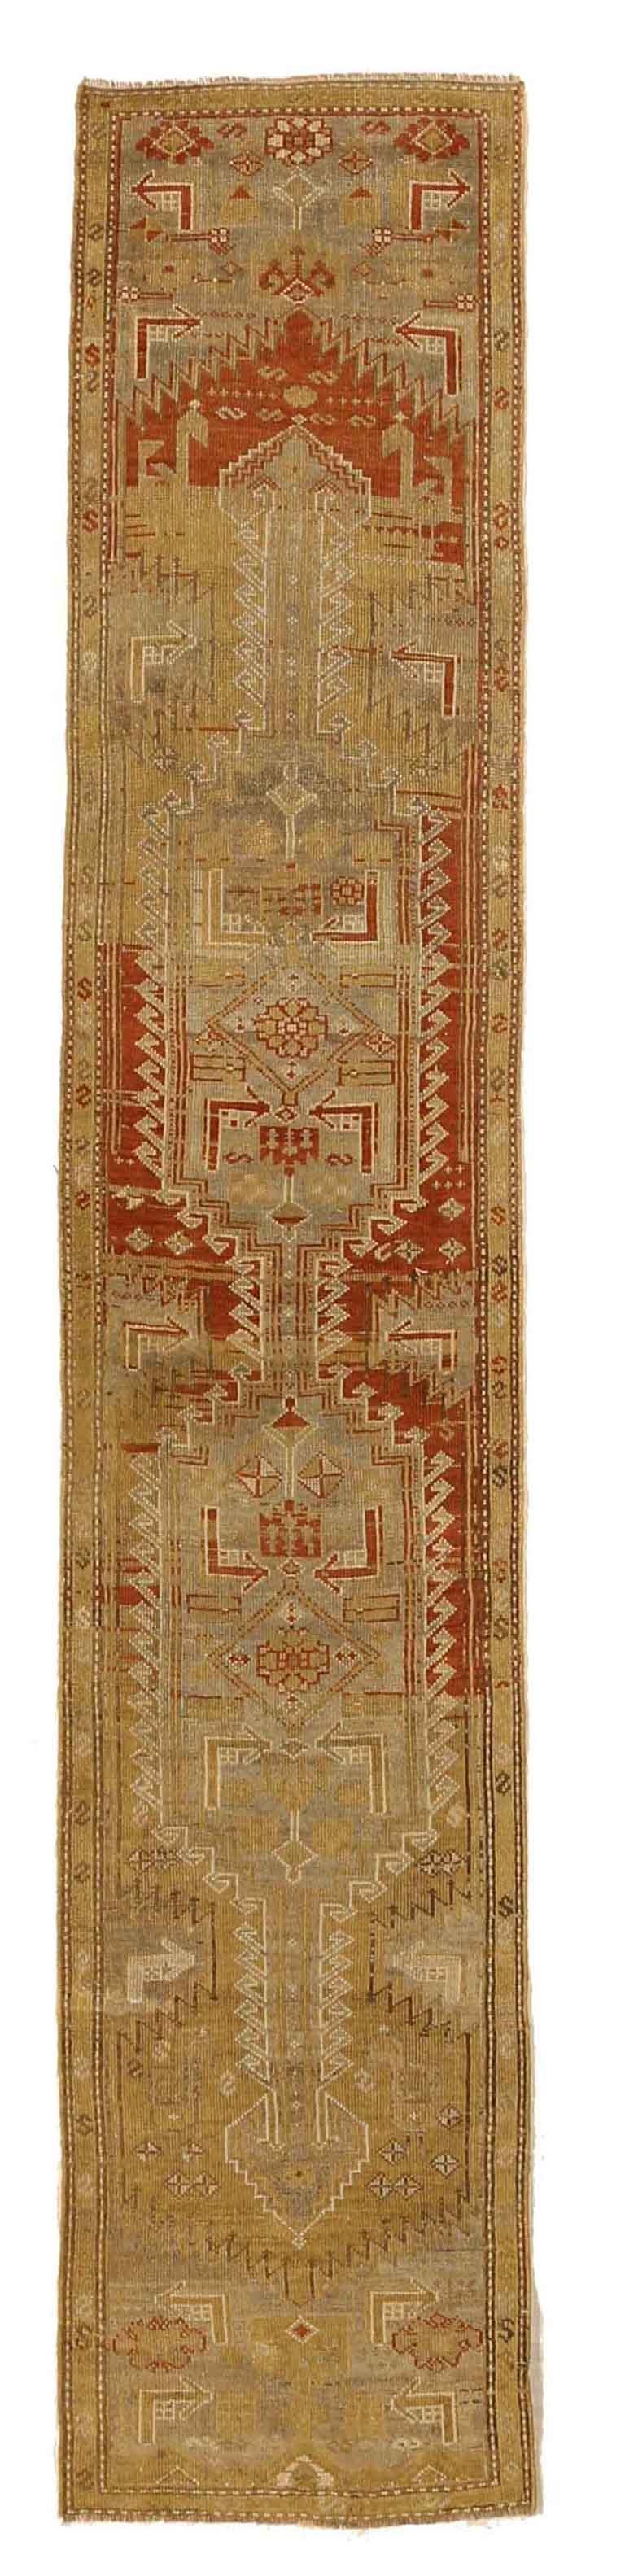 Antique Persian rug made from hand spun organic wool using designs favoured by weavers in Kolayaei, Iran. Color variation showcases the rug’s beautiful aging while the combination of gray, green, and rust with hints of blue is a sight to behold.